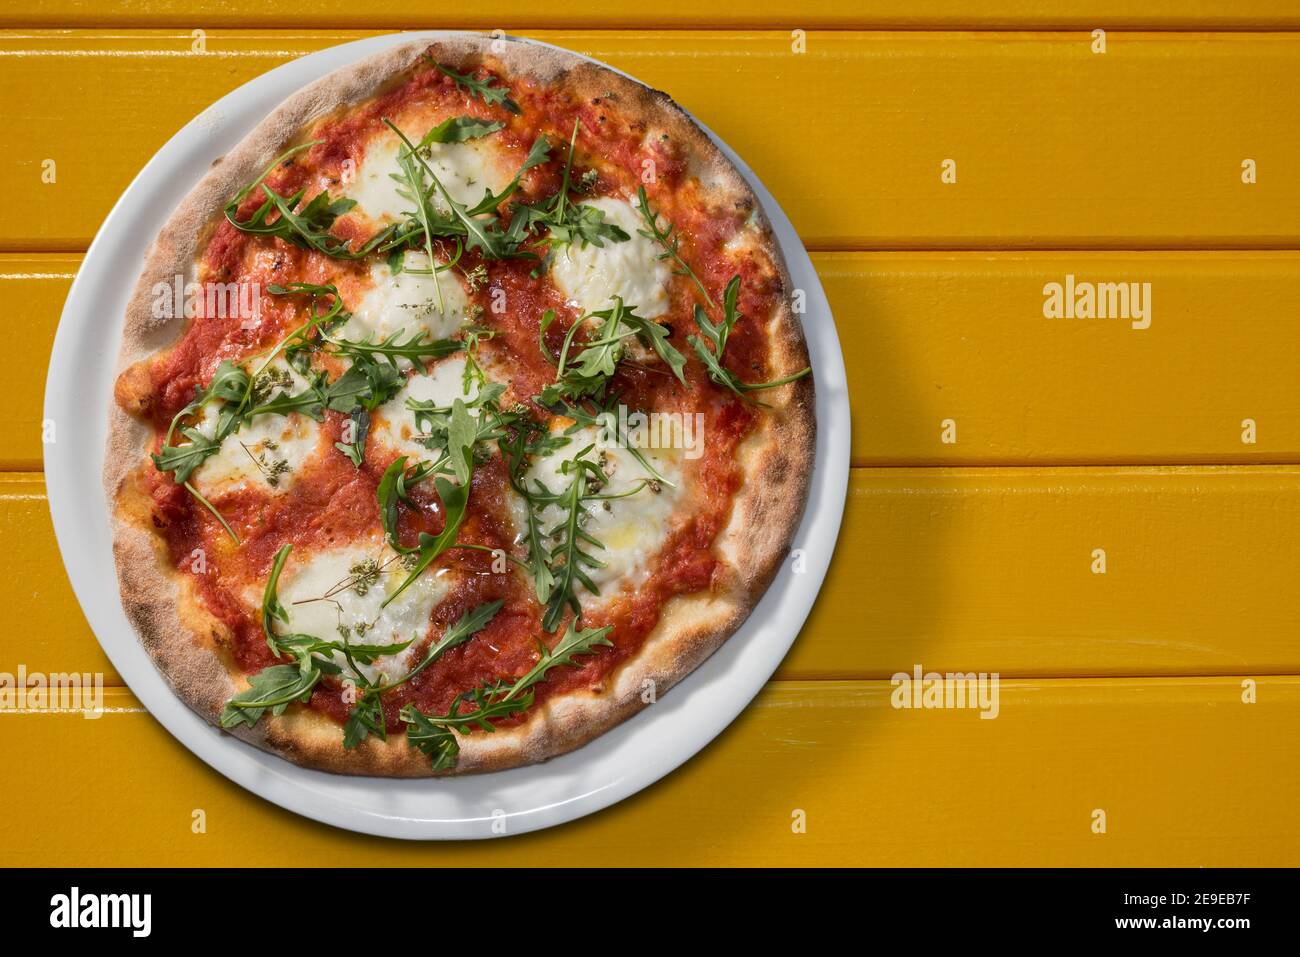 Pizza with tomato sauce, mozzarella and arugula or rocket in white plate on yellow boards, flat lay in top view with copy space Stock Photo